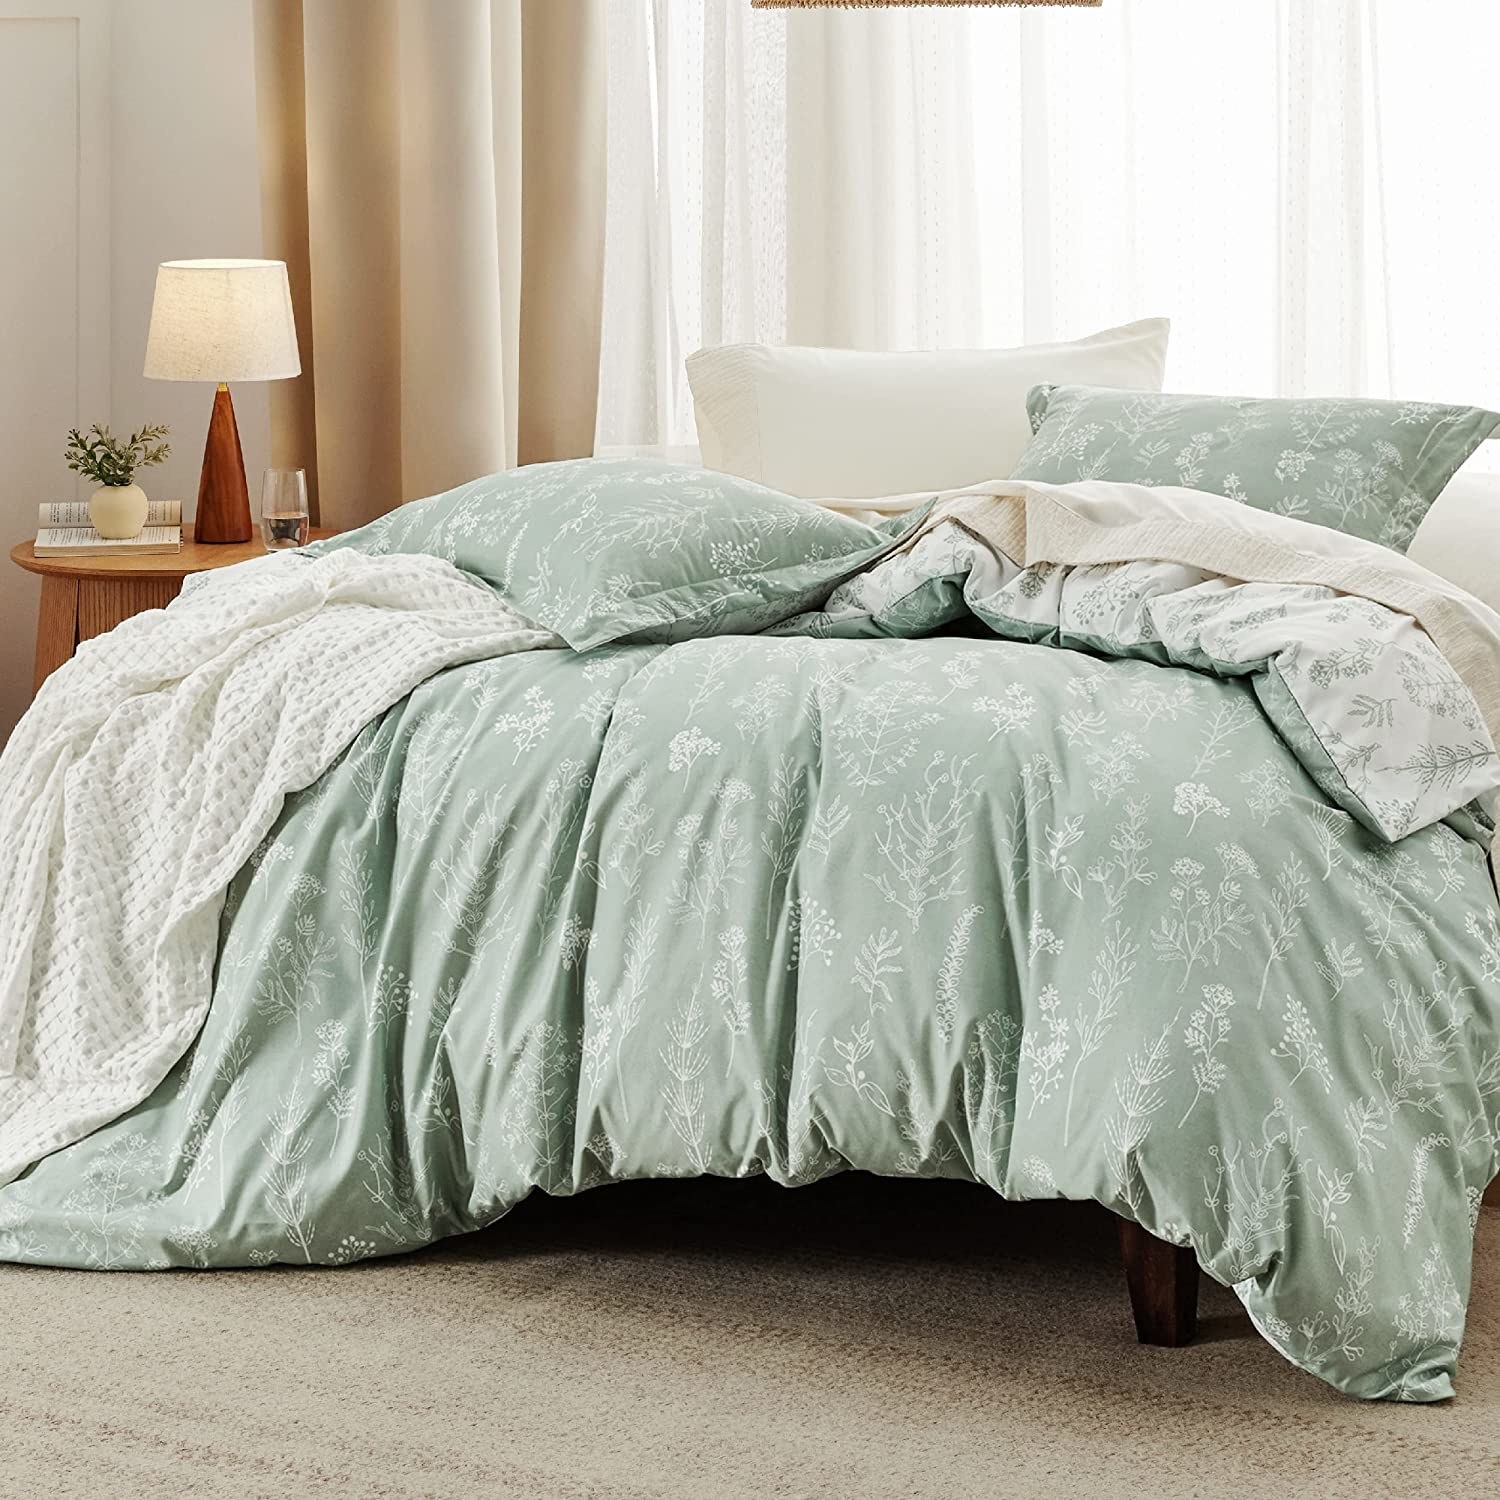 A light green blanket and pillows are shown on a bed in a bedroom